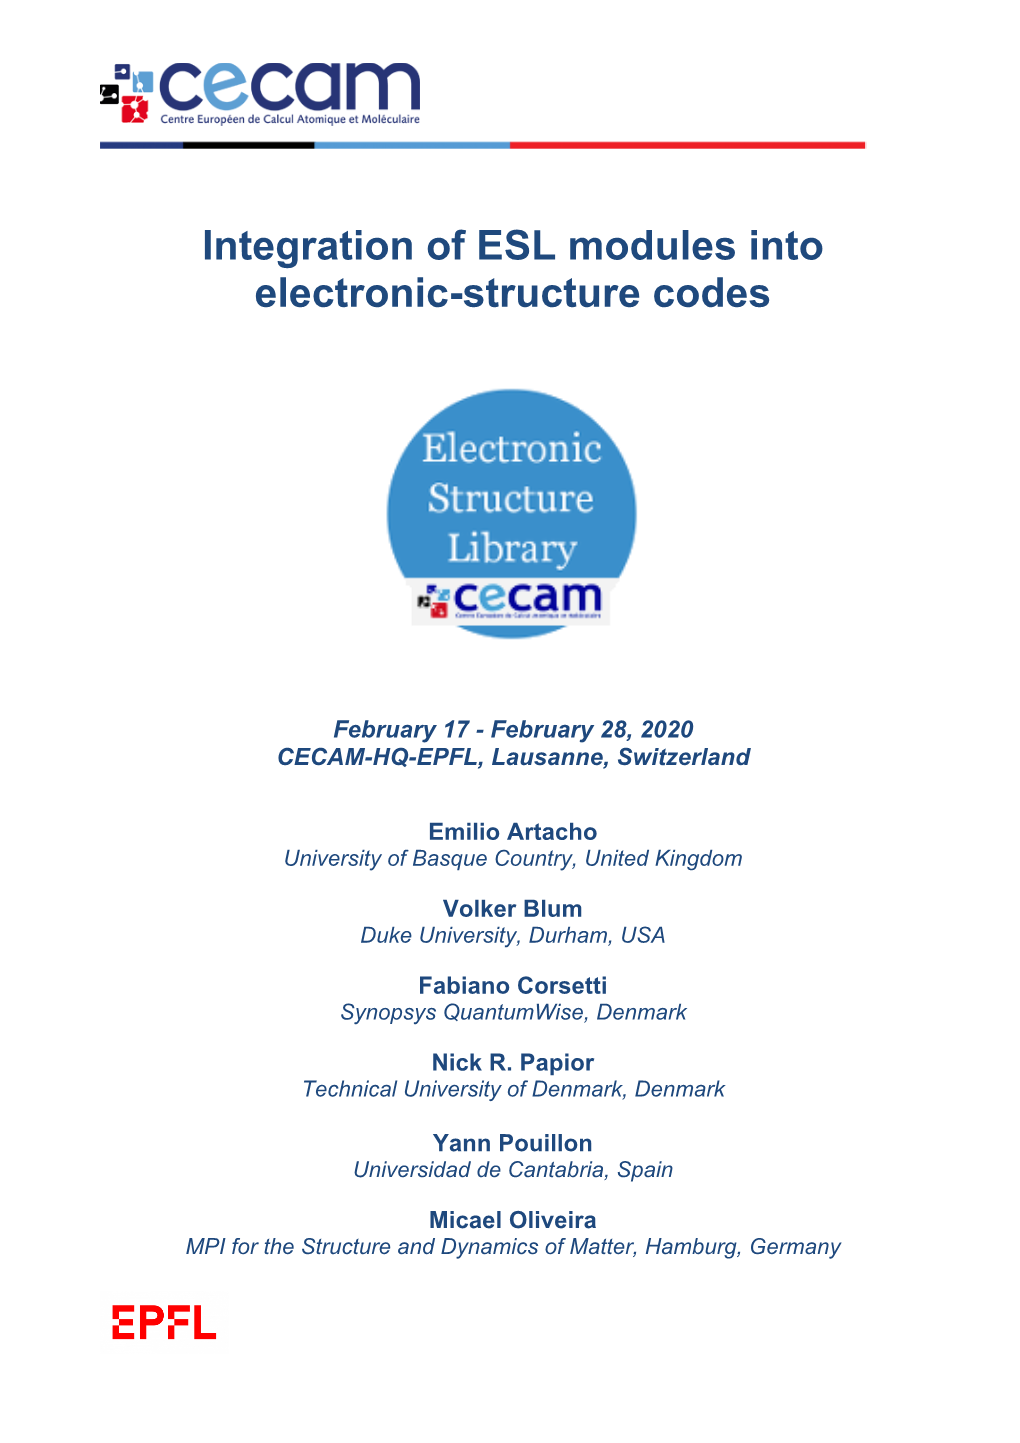 Integration of ESL Modules Into Electronic-Structure Codes